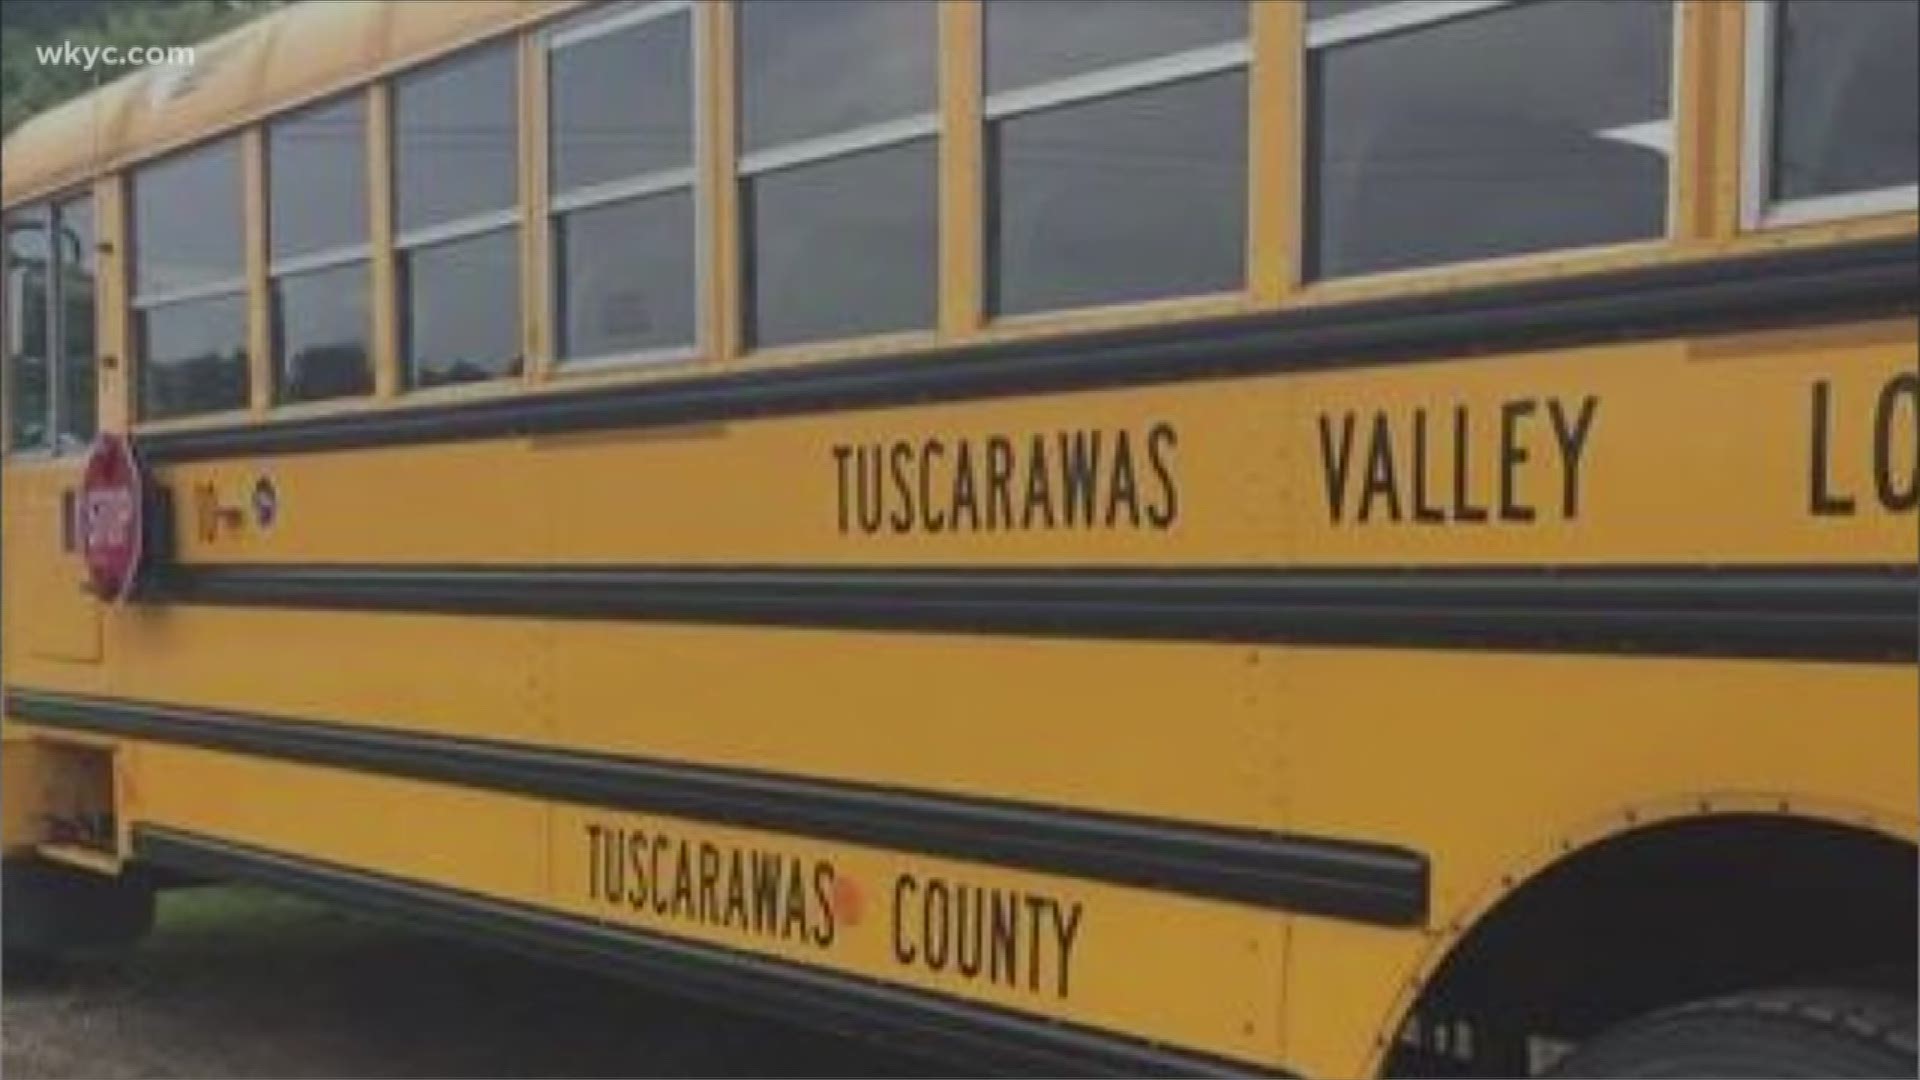 Batter stolen from school buses in Tuscarawus county